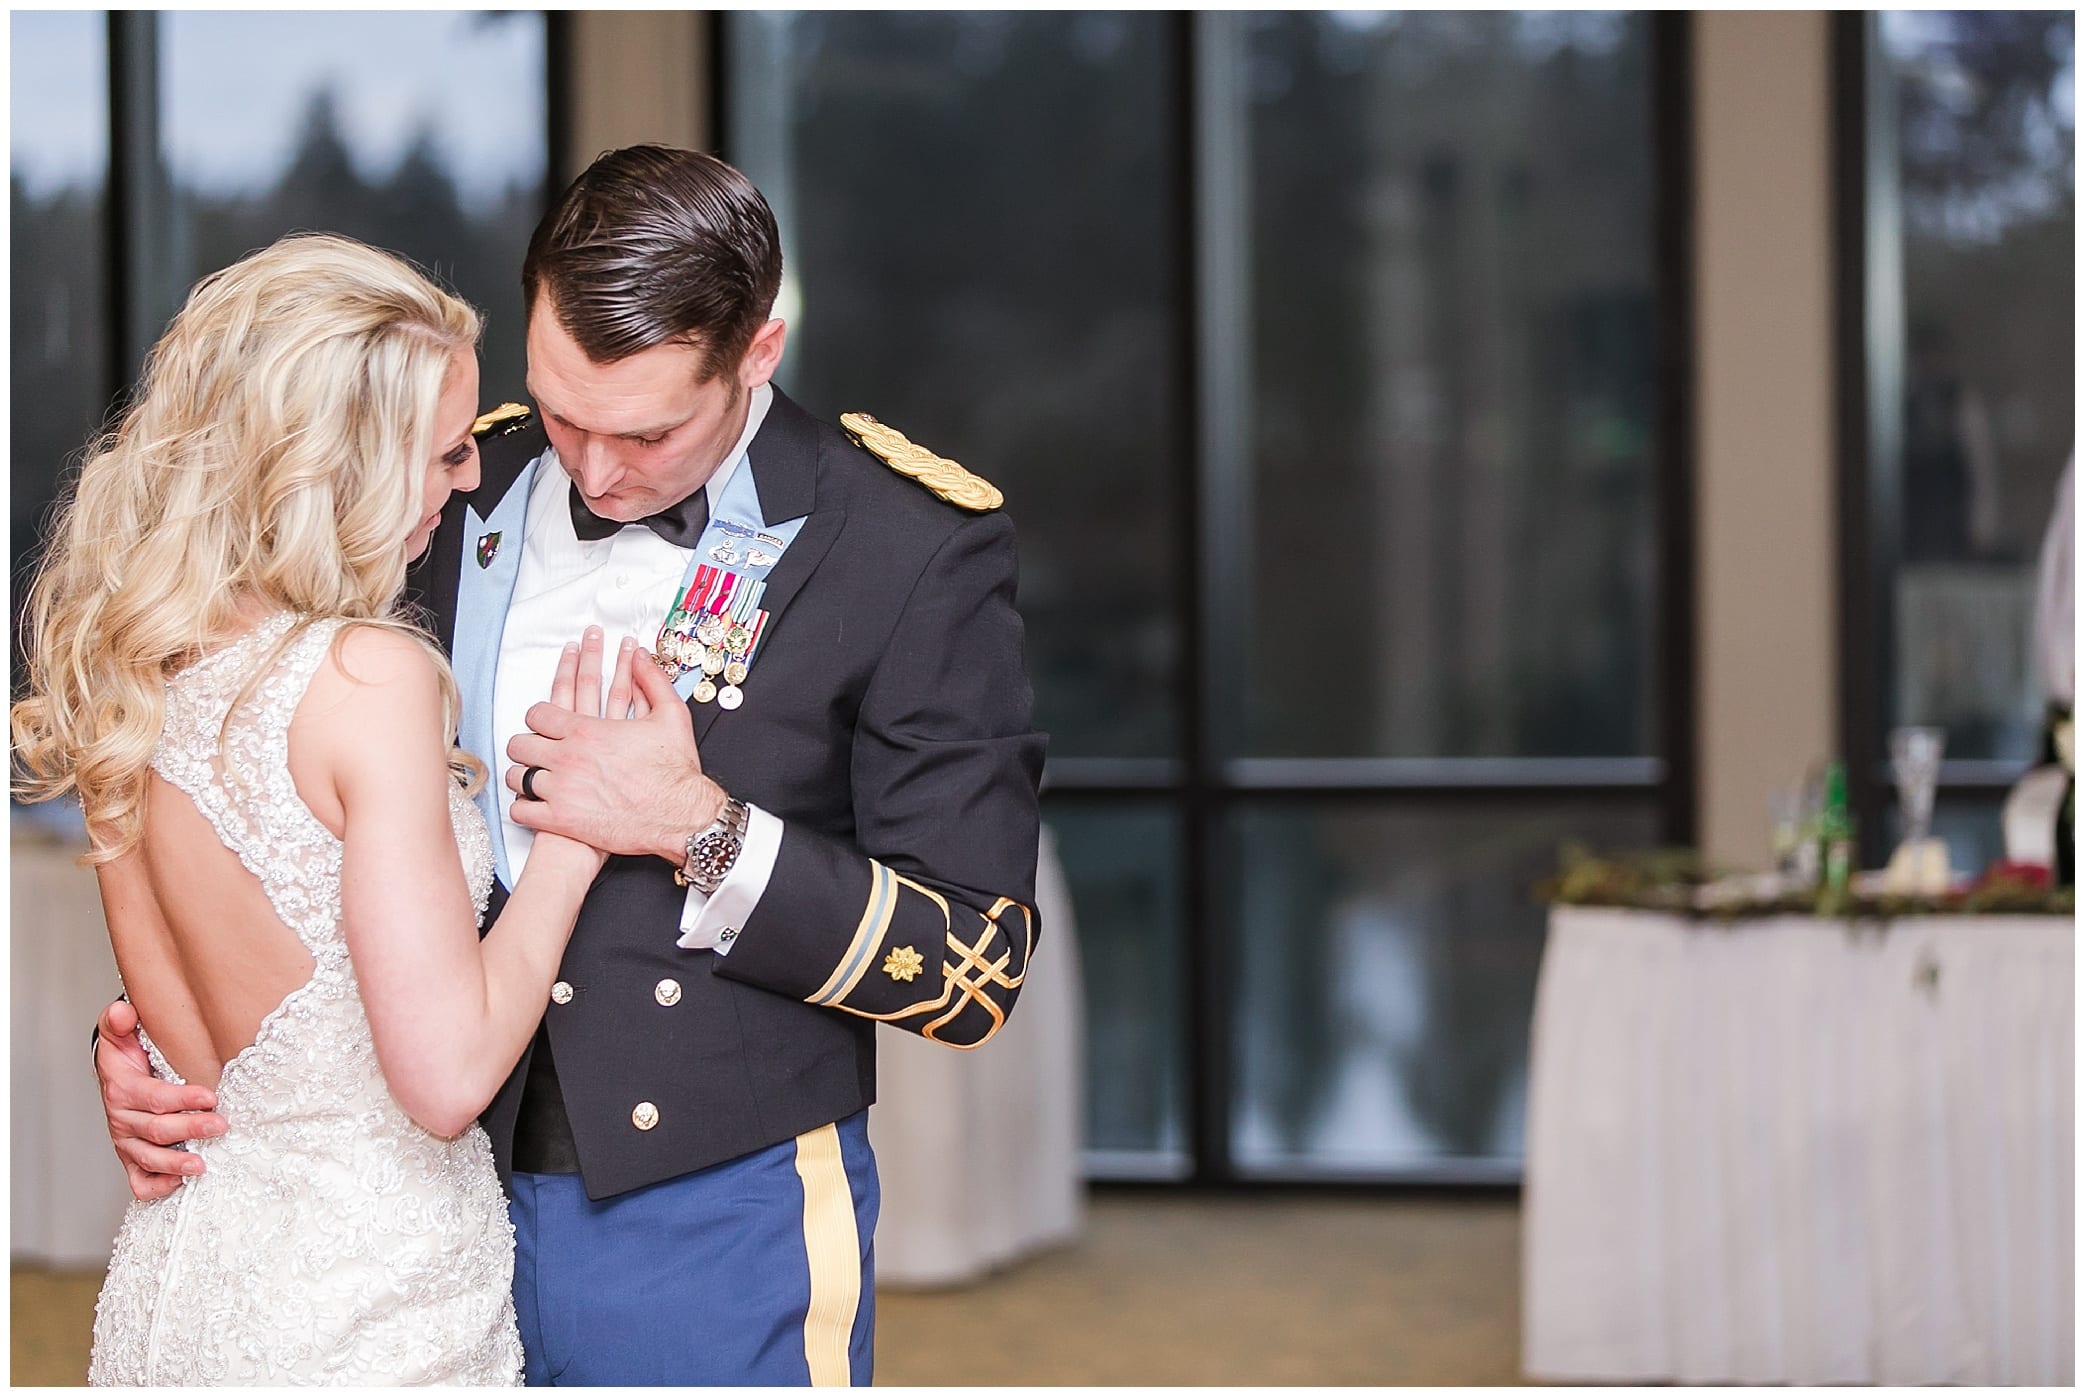 military wedding, american lake conference center wedding, military wedding photographer